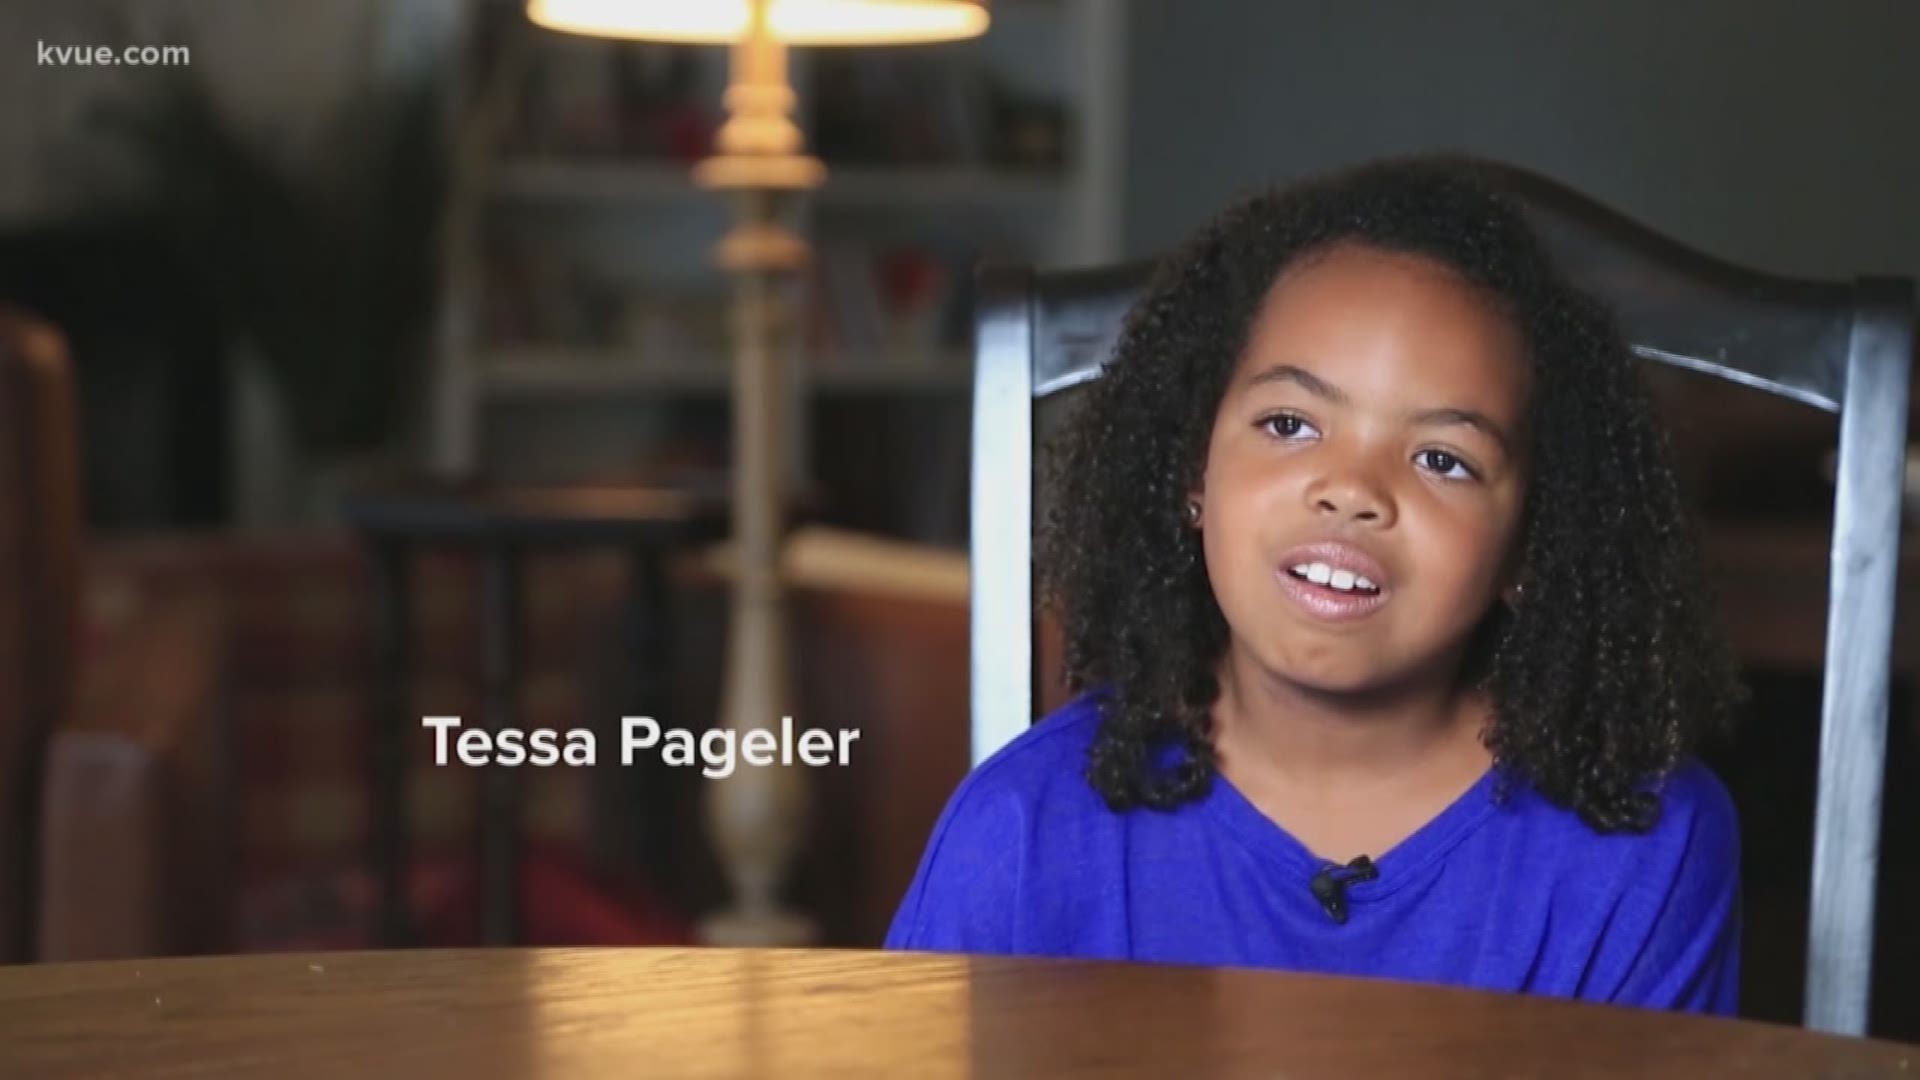 For 30 years KVUE has featured selfless people who are making a difference in their communities. Meet our next Five Kids Who Care winner: 8-year-old Tessa Pageler.